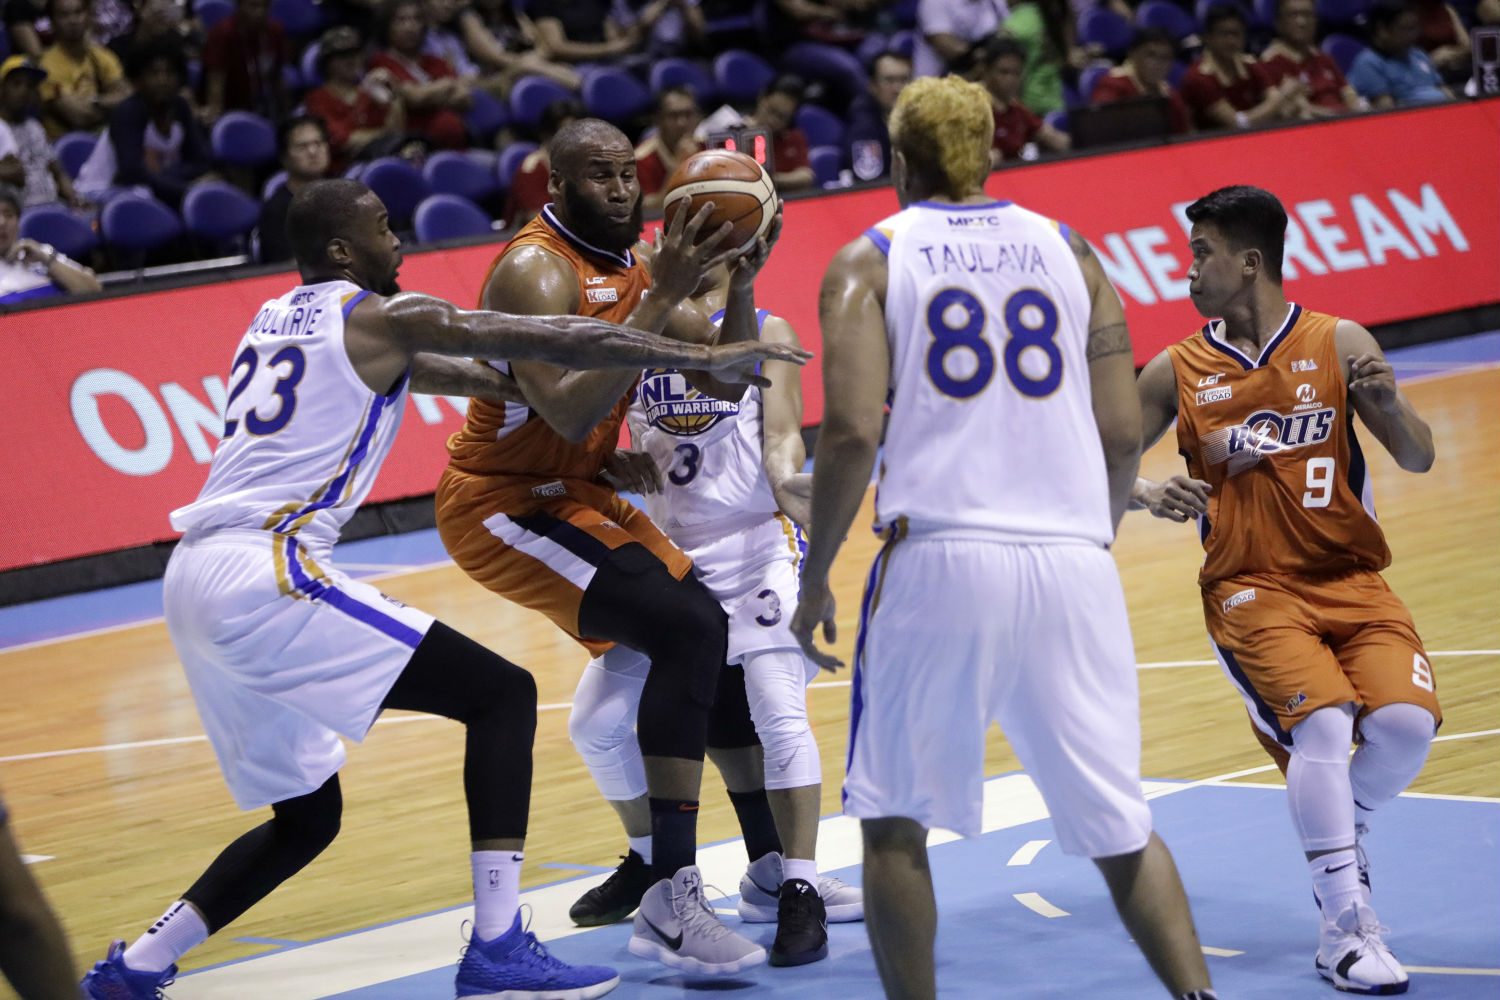 Meralco finds spark, sends NLEX to 3rd straight loss